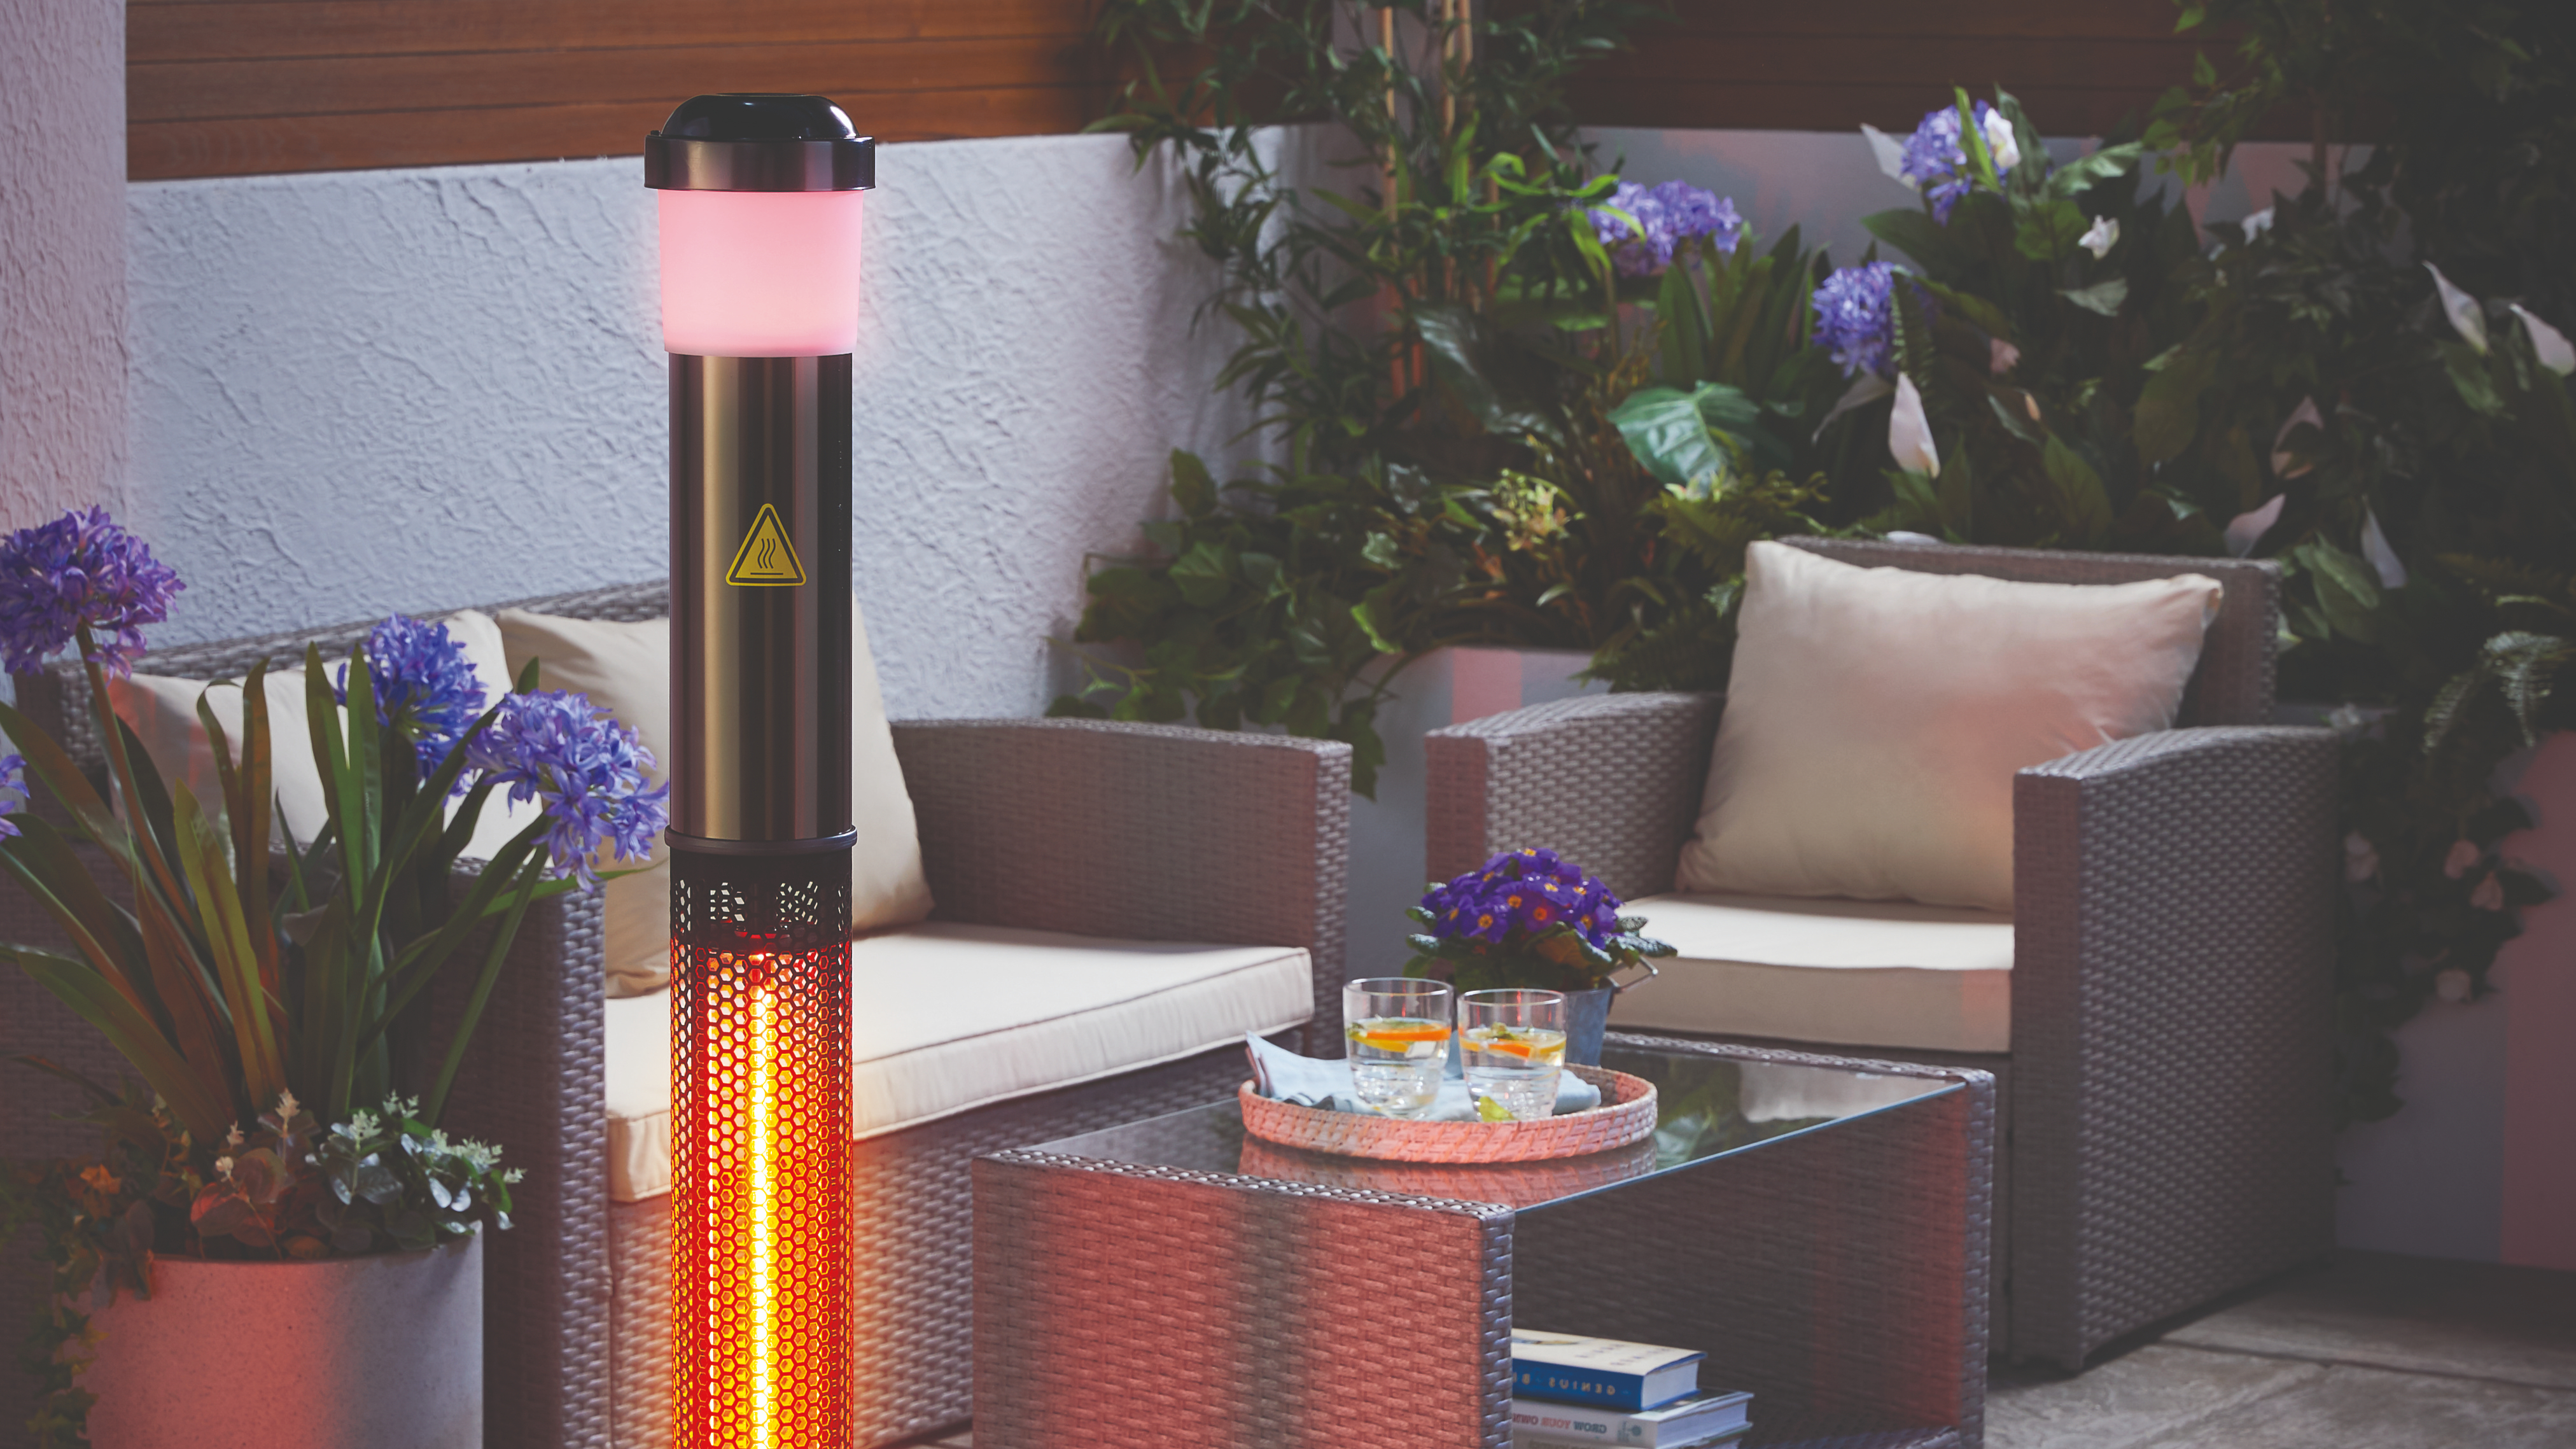 Aldi Is Selling A Patio Heater With A Bluetooth Speaker And intended for dimensions 4048 X 2277